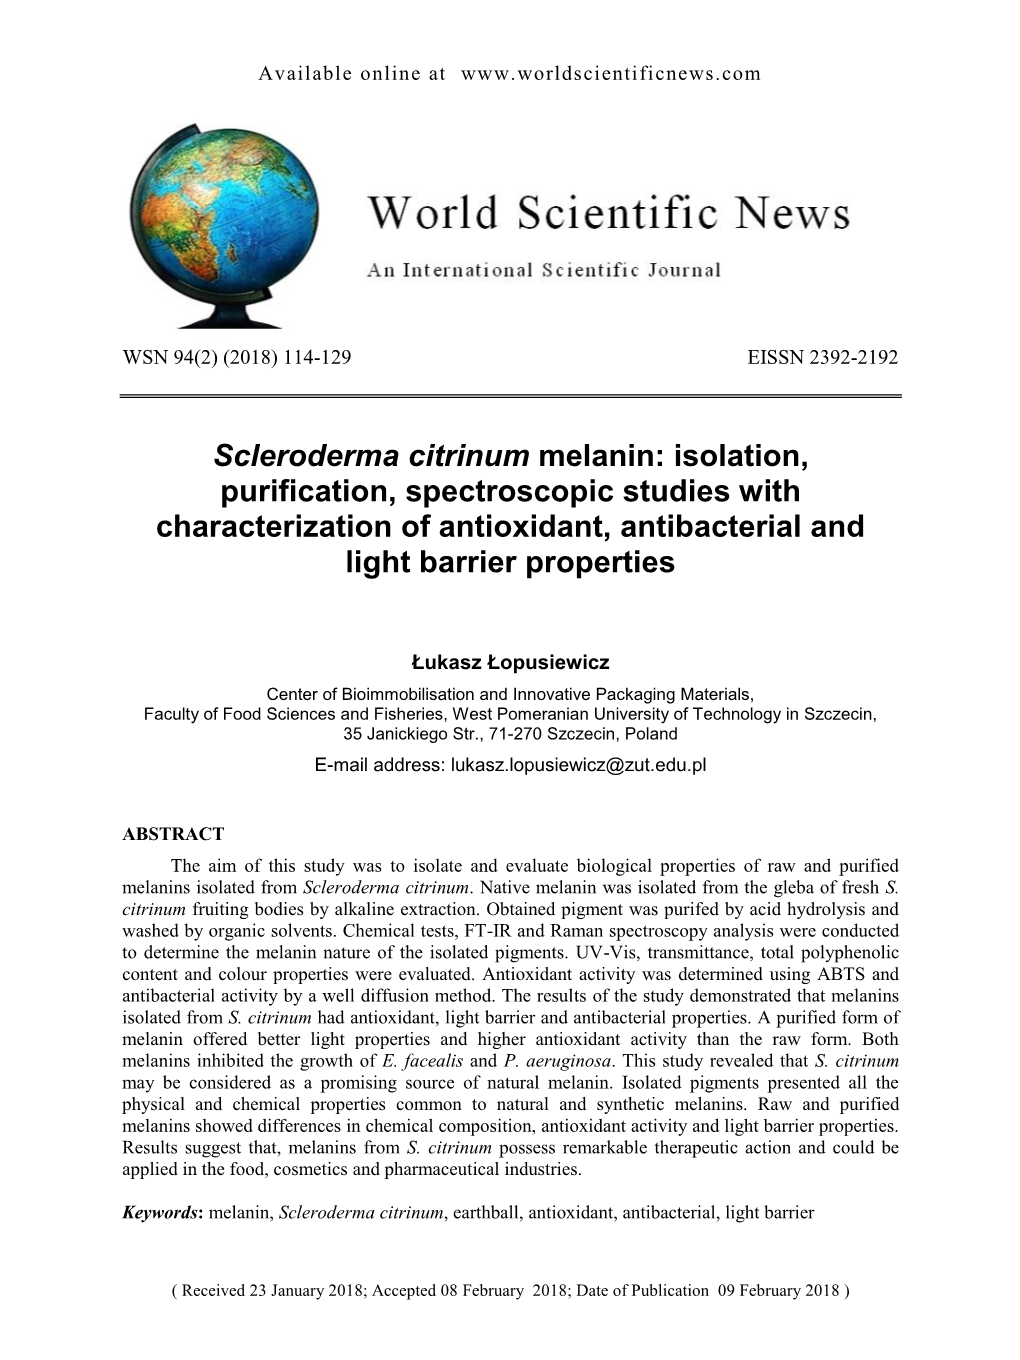 Scleroderma Citrinum Melanin: Isolation, Purification, Spectroscopic Studies with Characterization of Antioxidant, Antibacterial and Light Barrier Properties